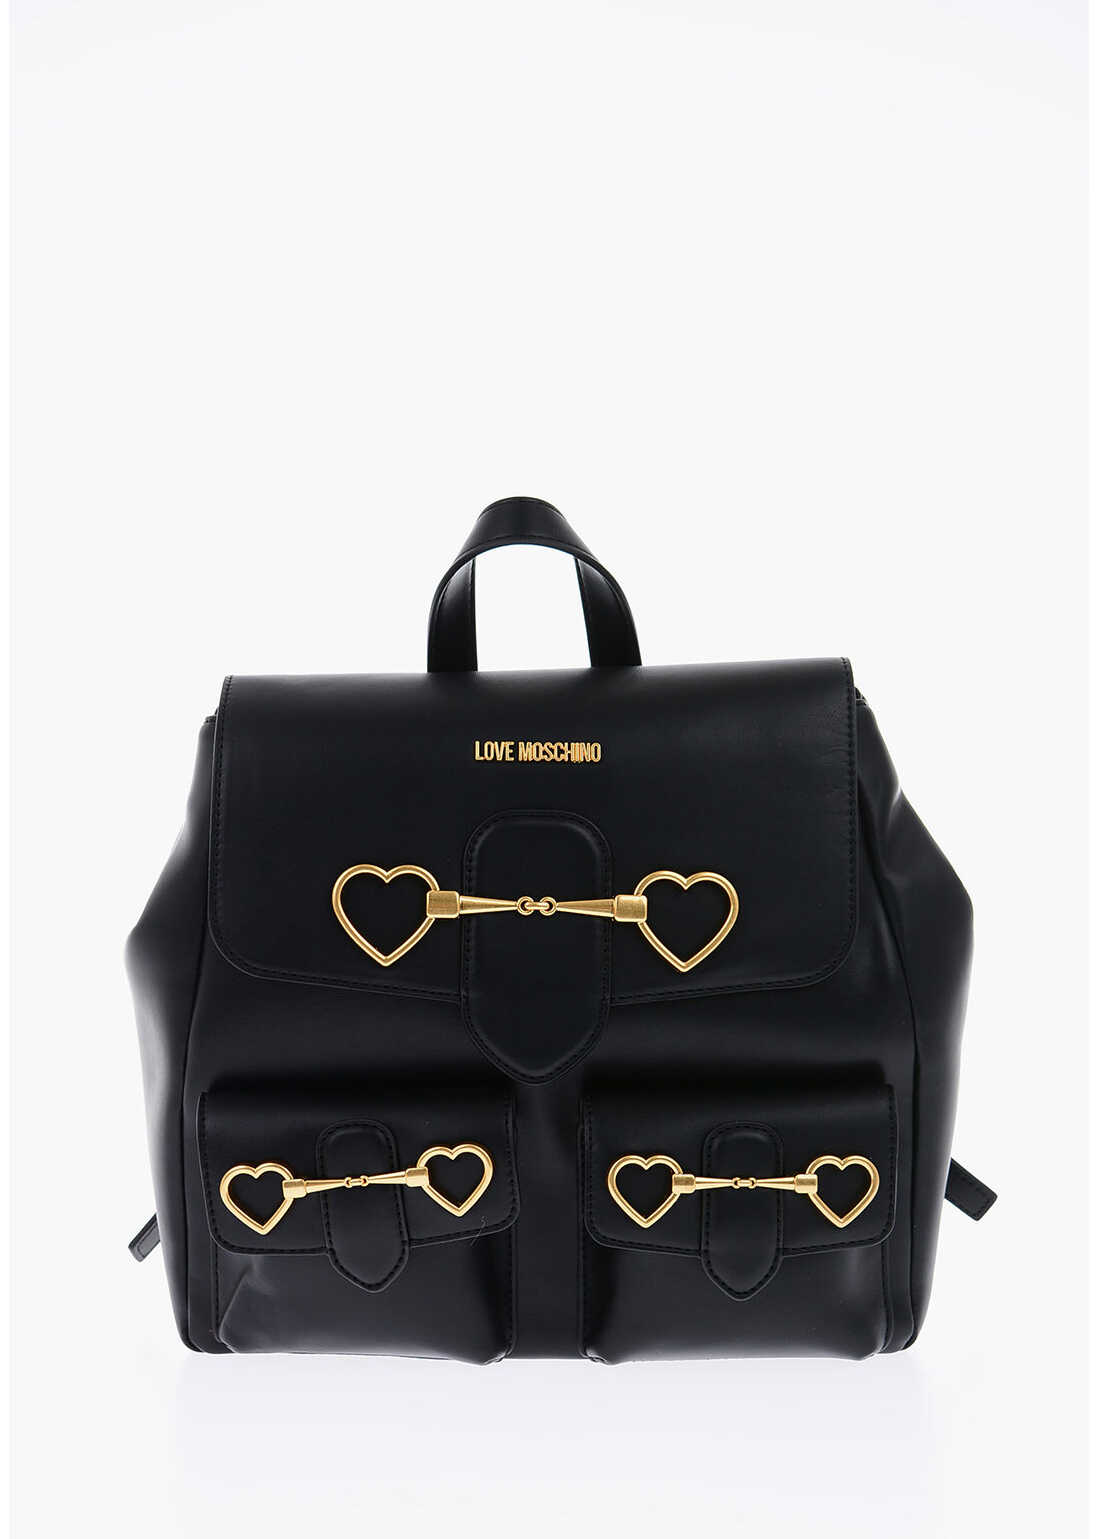 Moschino Love Faux Leather Backpack With Double Pockets Front Black image12